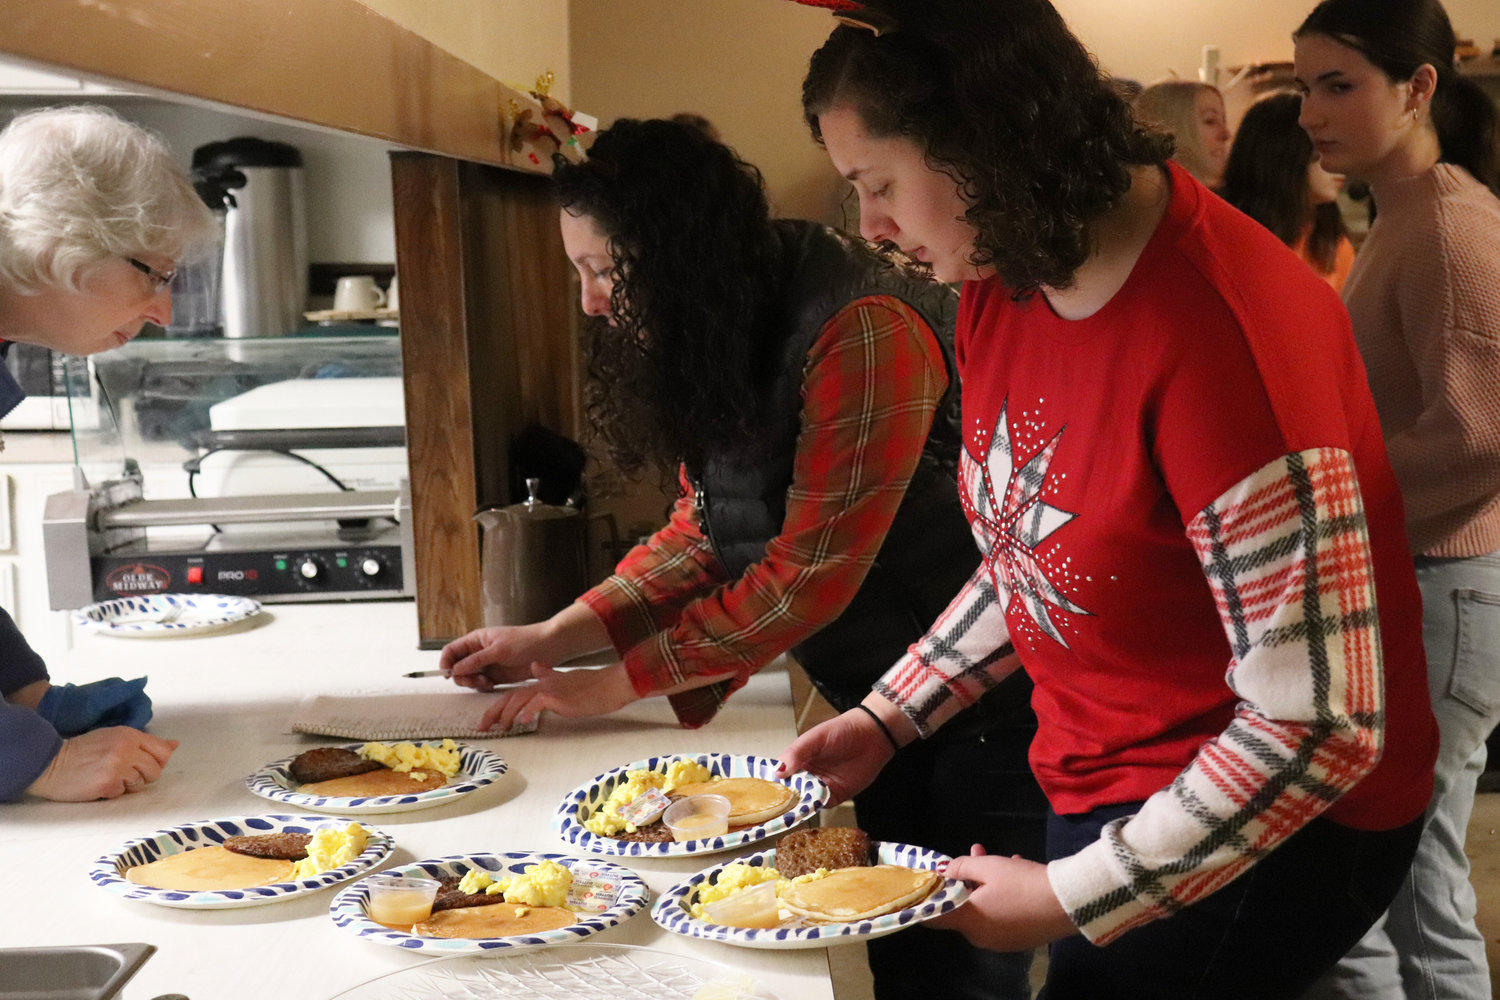 Guests collect plates of pancakes, scrambled eggs, sausage and applesauce during a Breakfast with Santa event at the Moose Family Center in Centralia on Saturday.